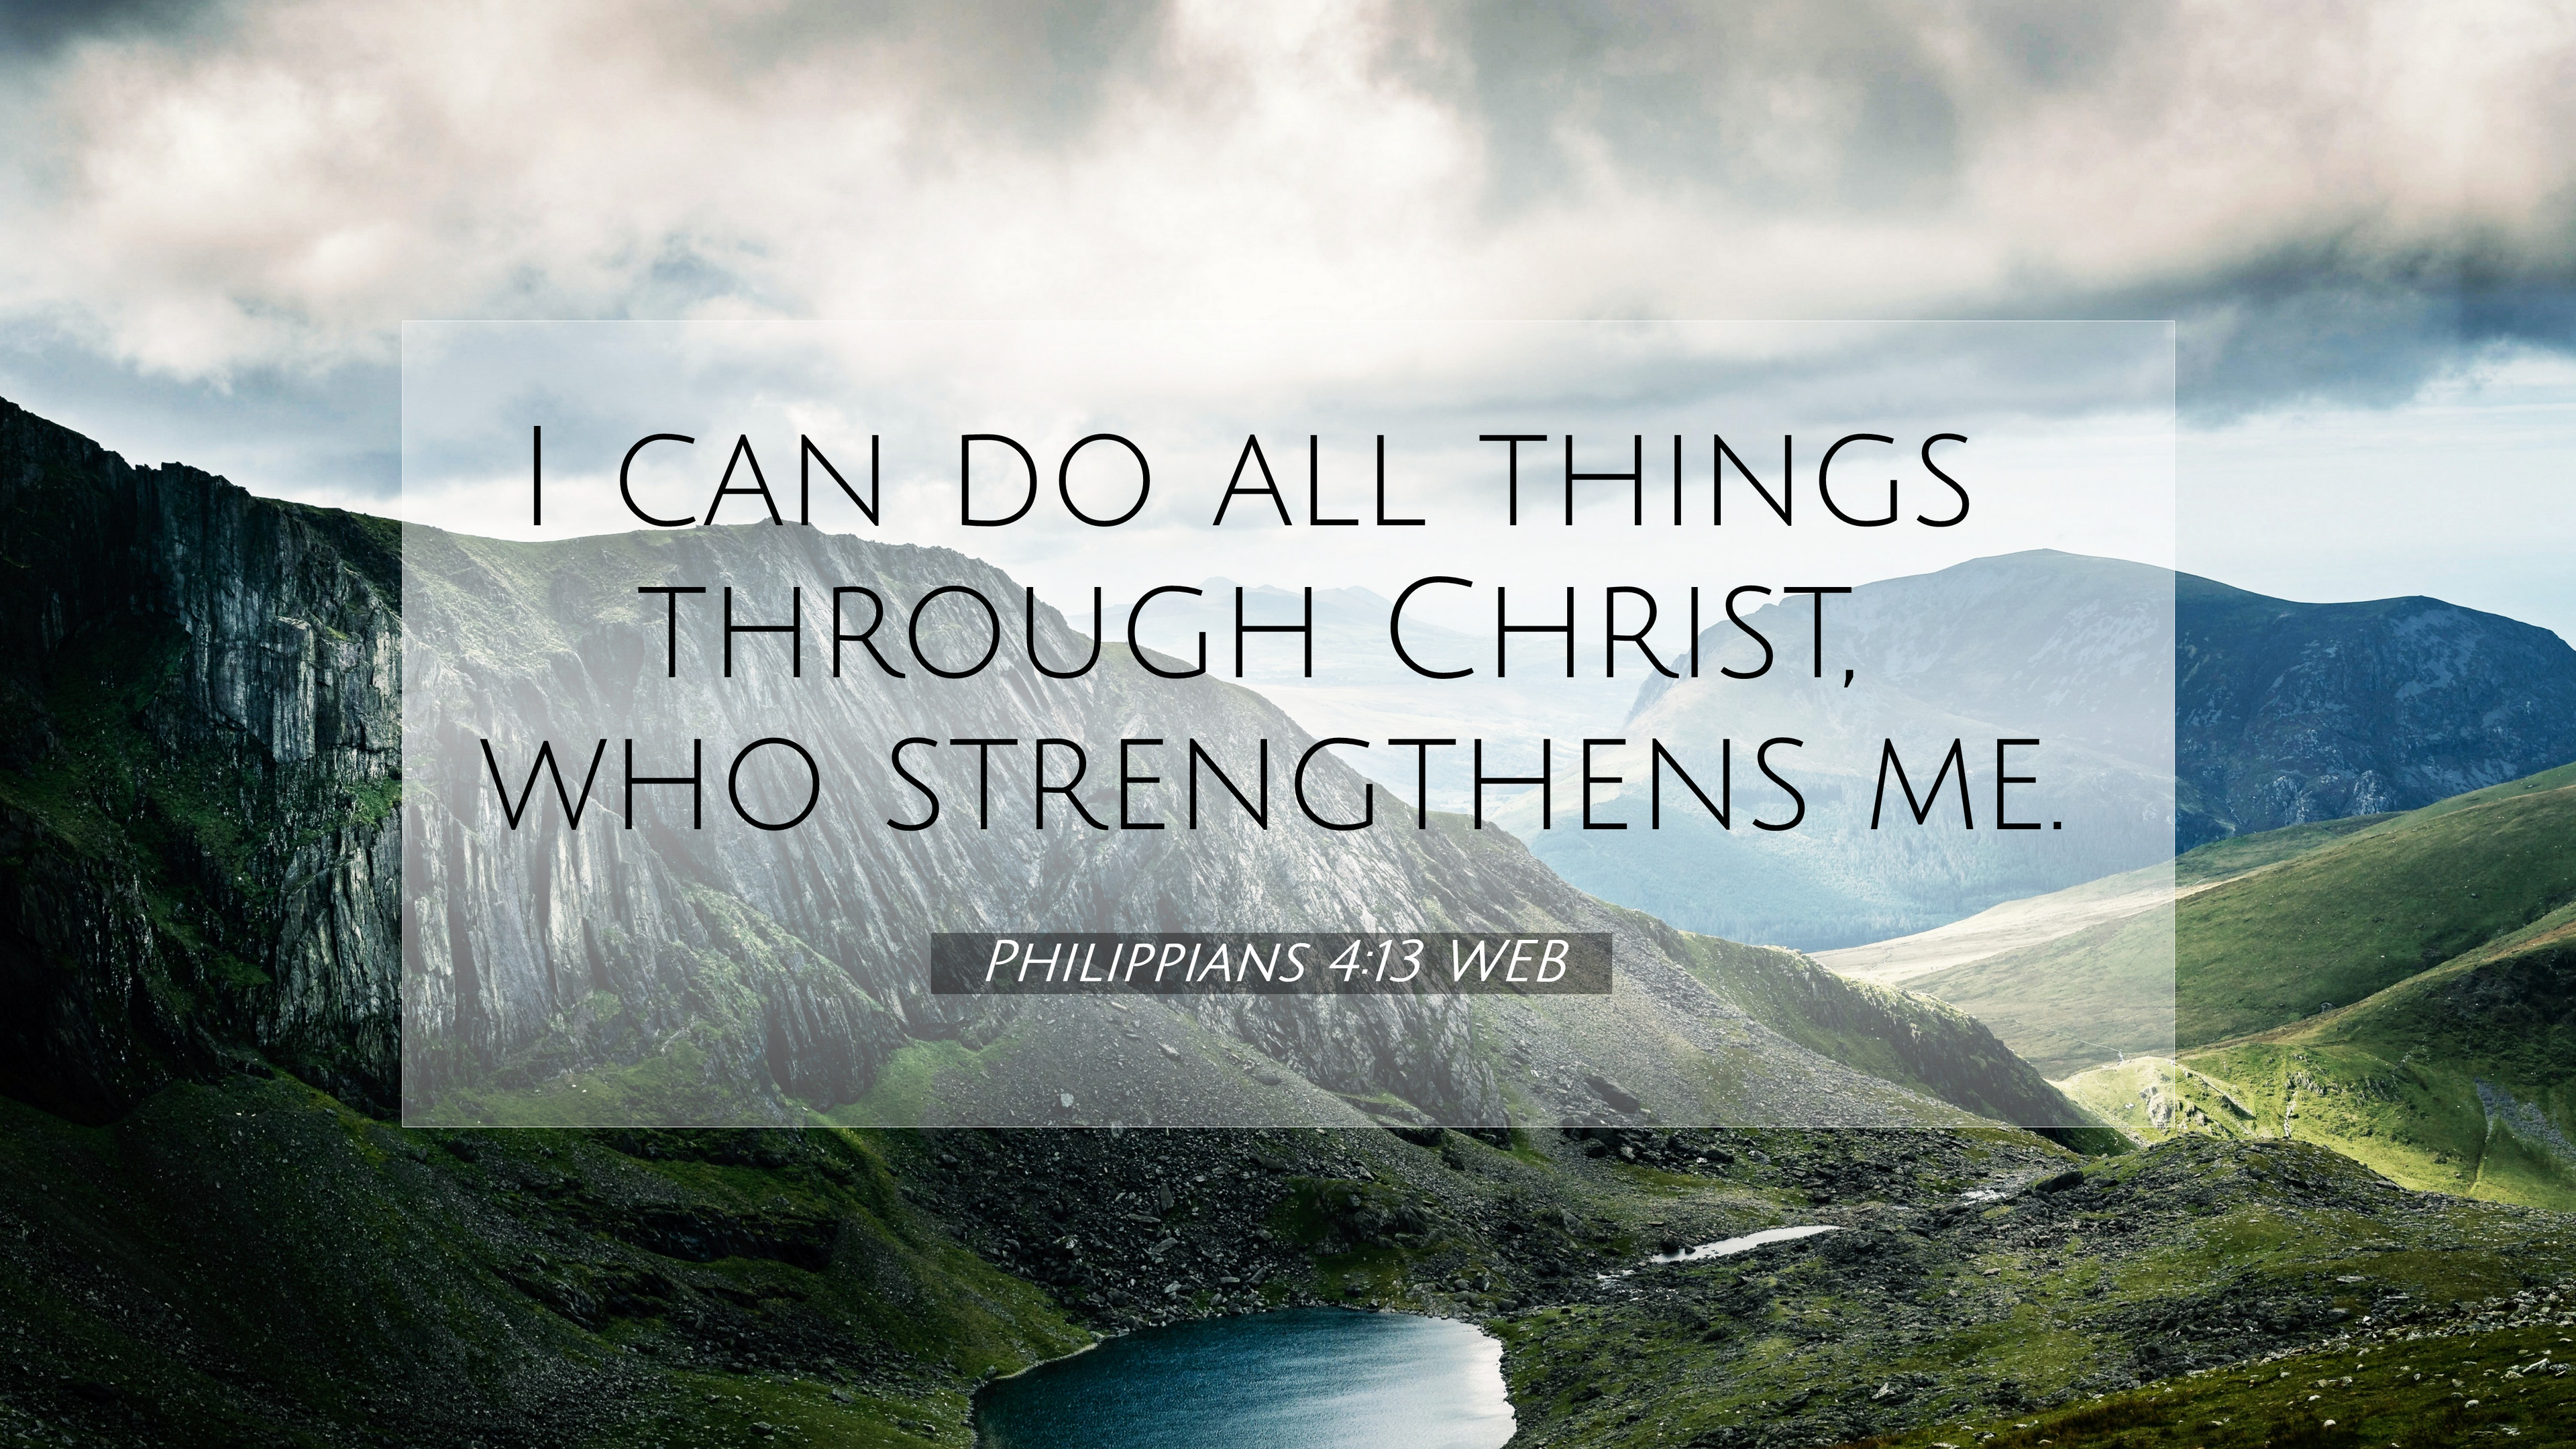 Philippians 4:13 WEB 4K Wallpaper can do all things through Christ, who